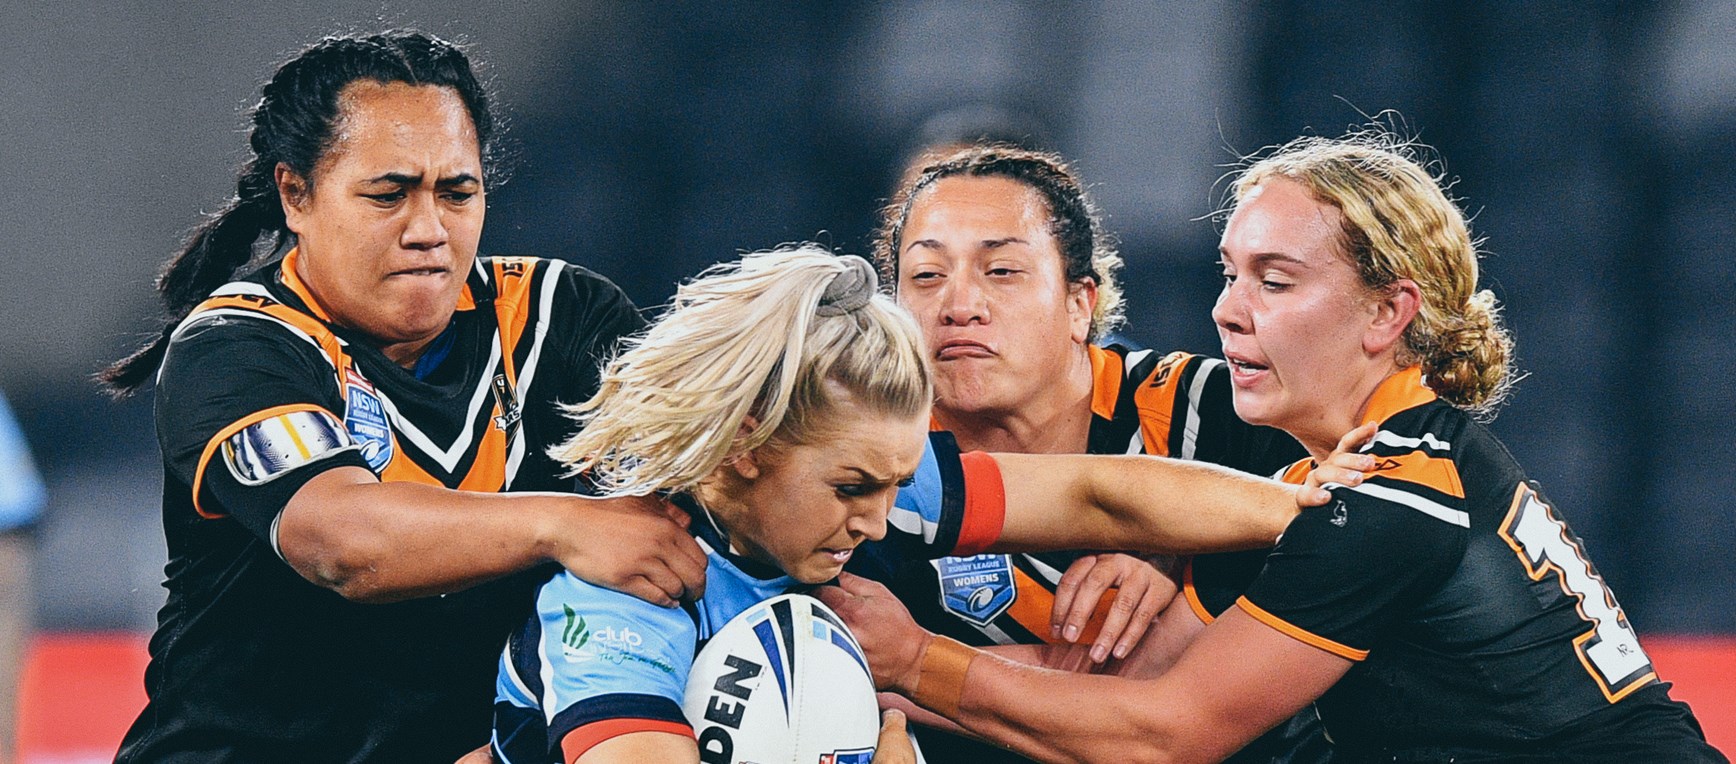 Wests Tigers Harvey Norman NSW Women's side in action!